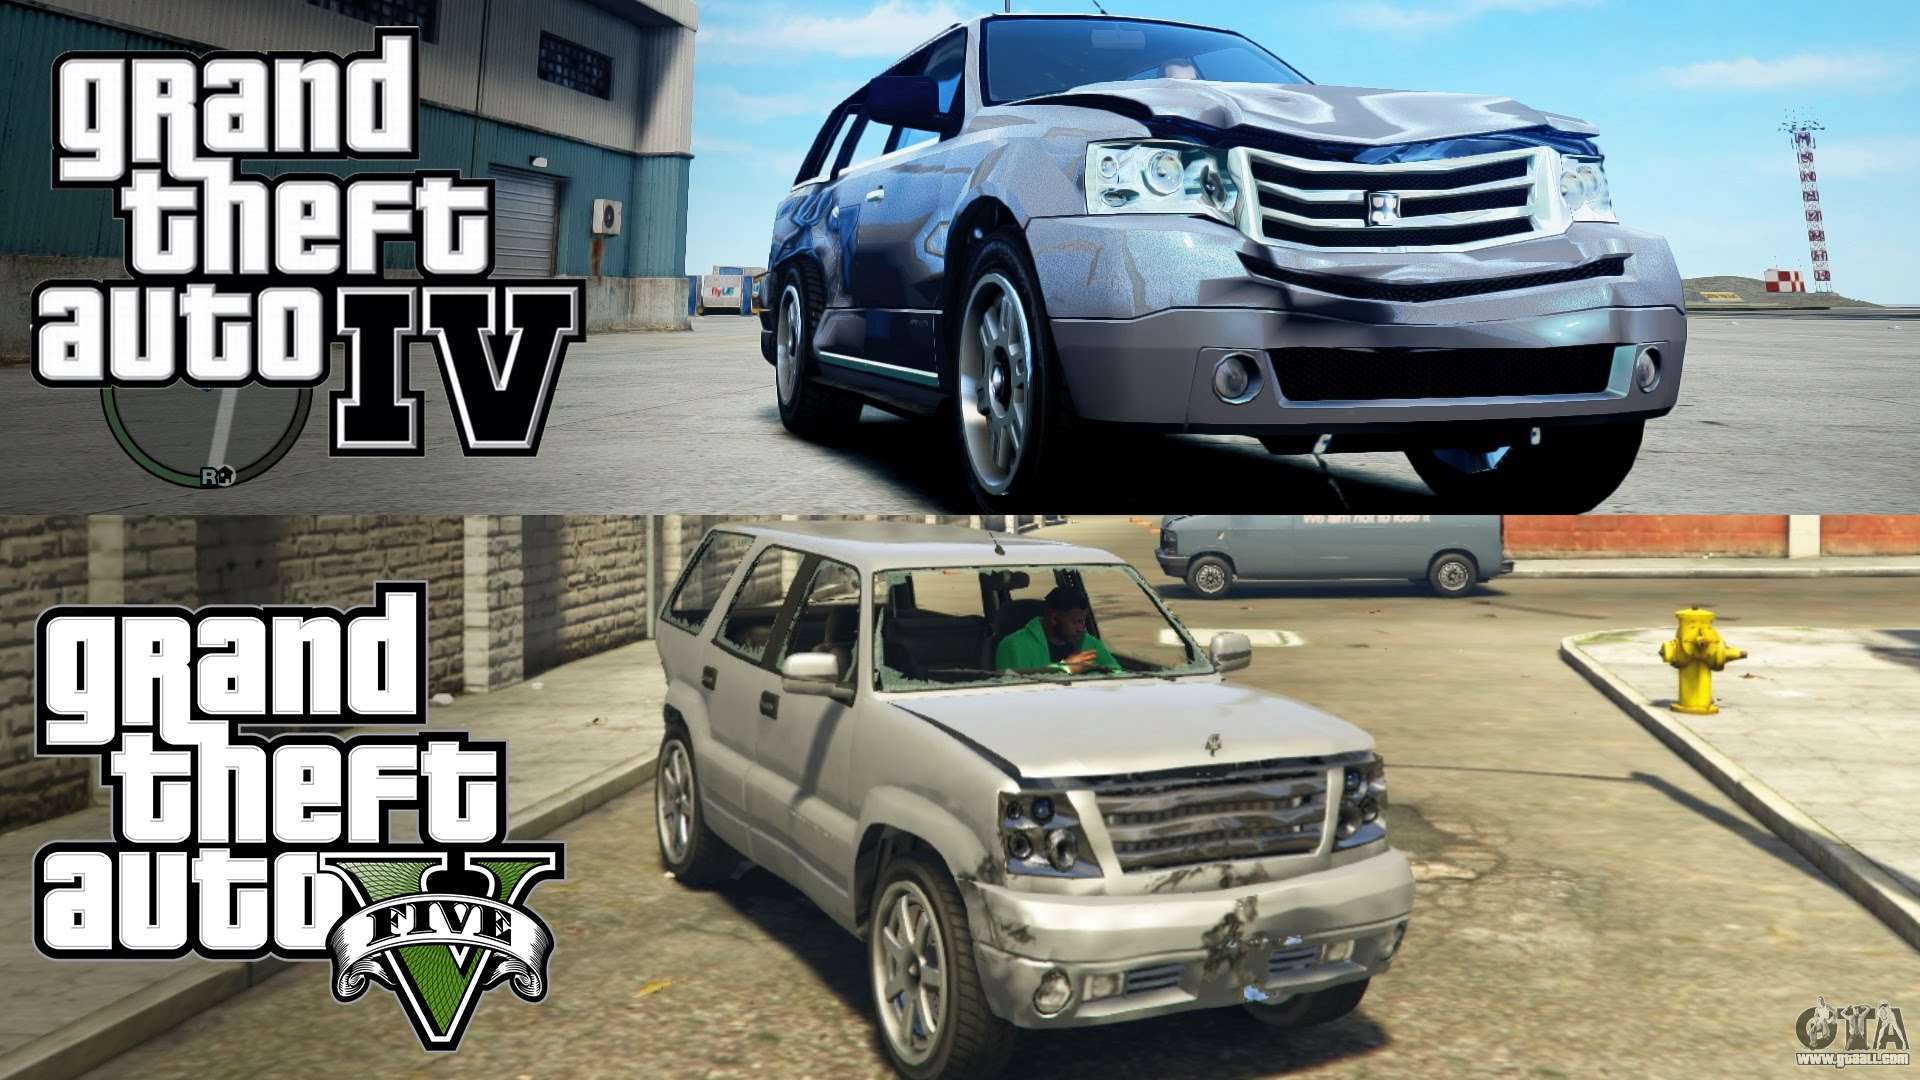 Comparison of the physics and gameplay of GTA 5 and GTA 4